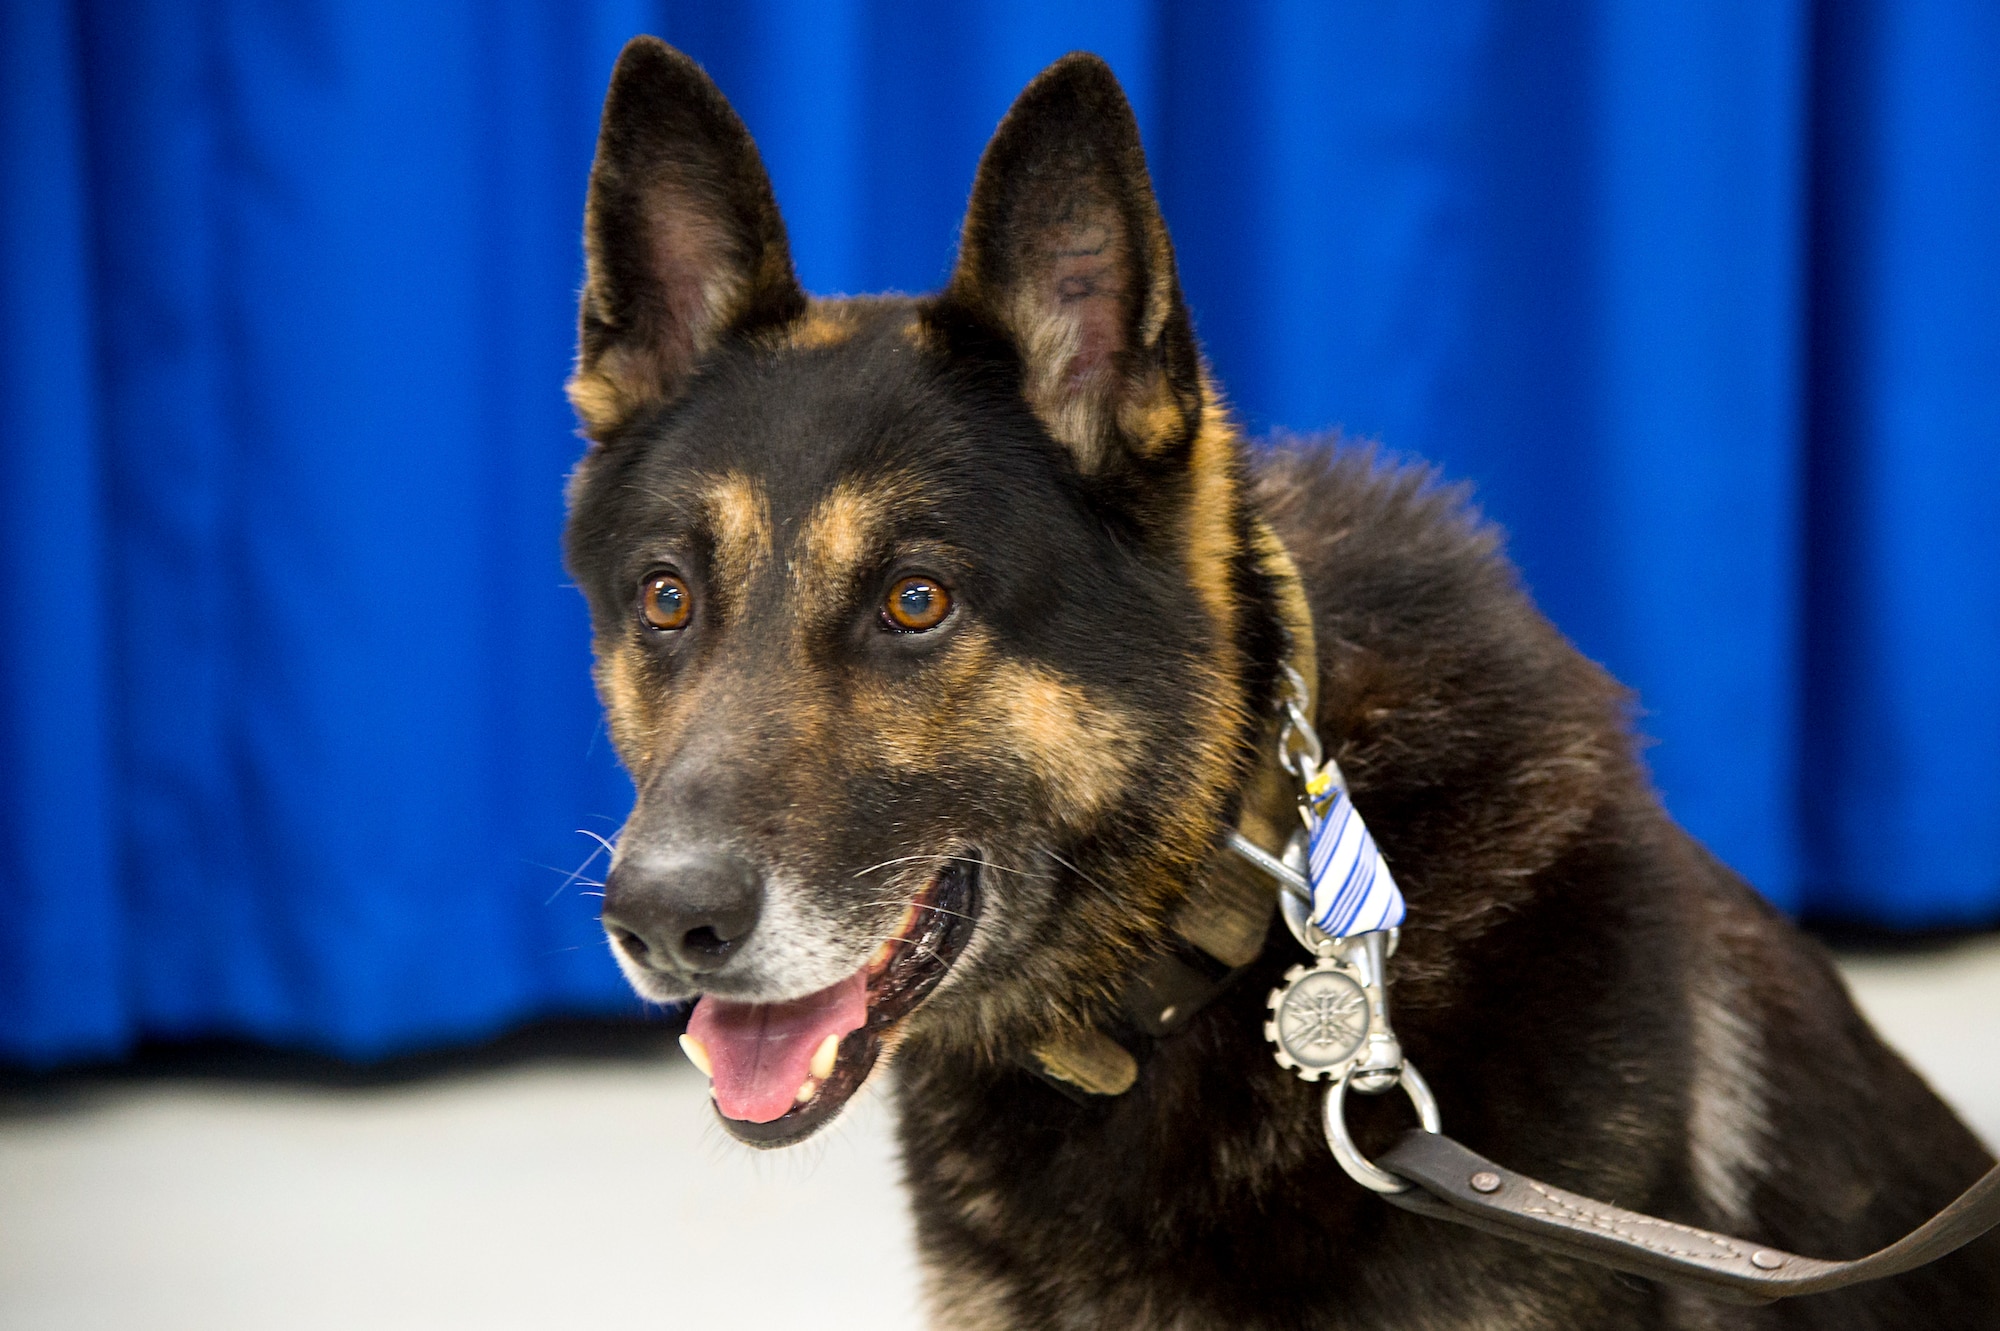 Military working dog Apacs, sits during his retirement ceremony March 9, 2018, at MacDill Air Force Base, Fla. Throughout his six years of service, Apacs deployed twice in support of Operation Enduring Freedom, conducted thousands of explosive detection sweeps and hundreds of random anti-terrorism measures.